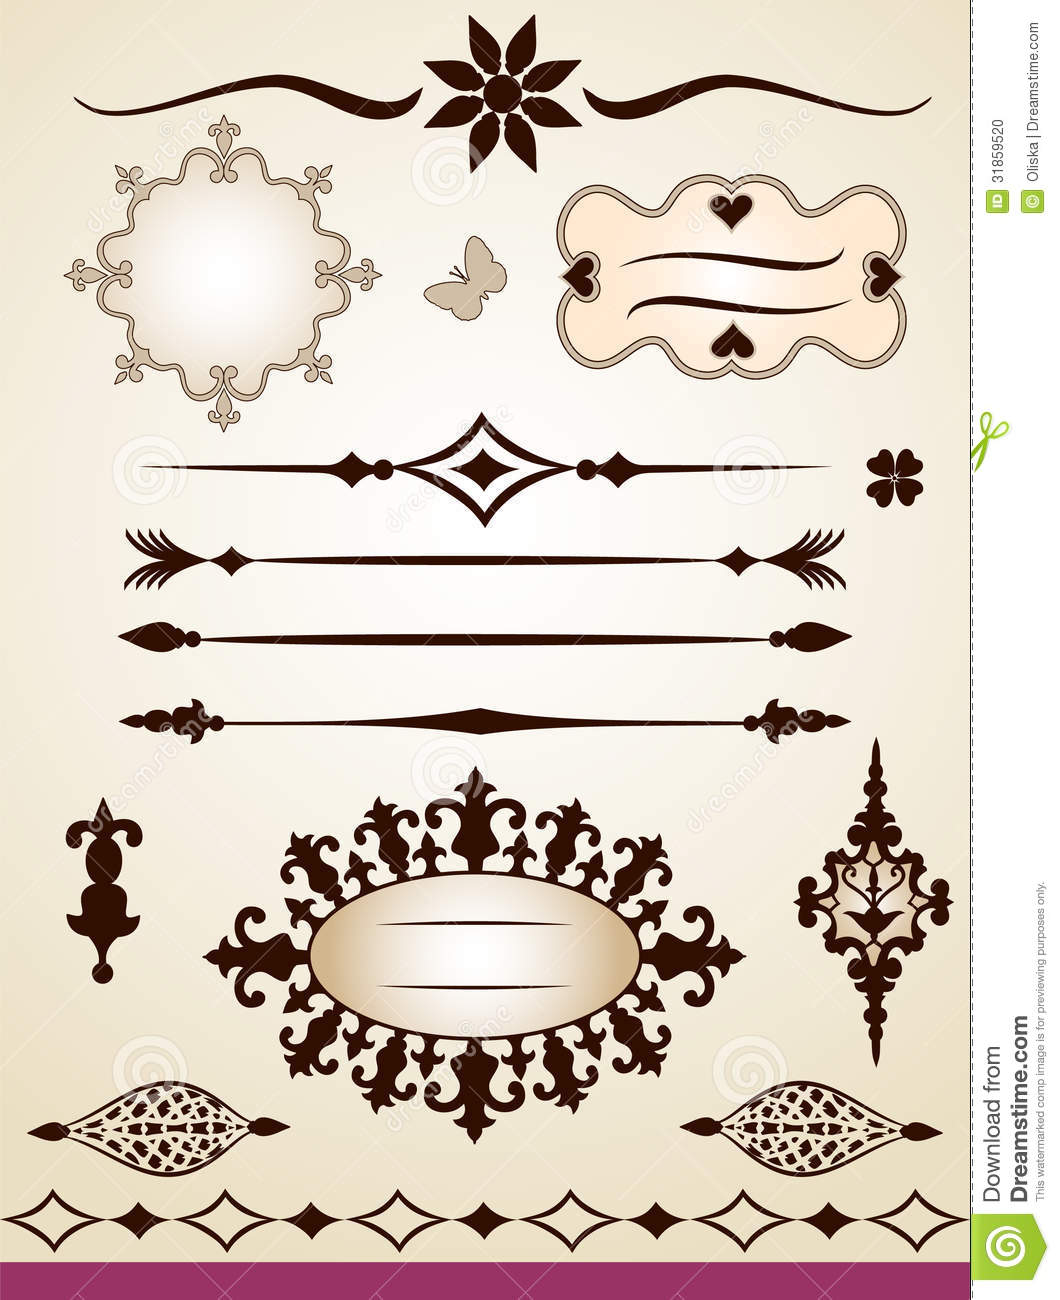 Text Dividers Frames Border And Decorations Stock Photo   Image    